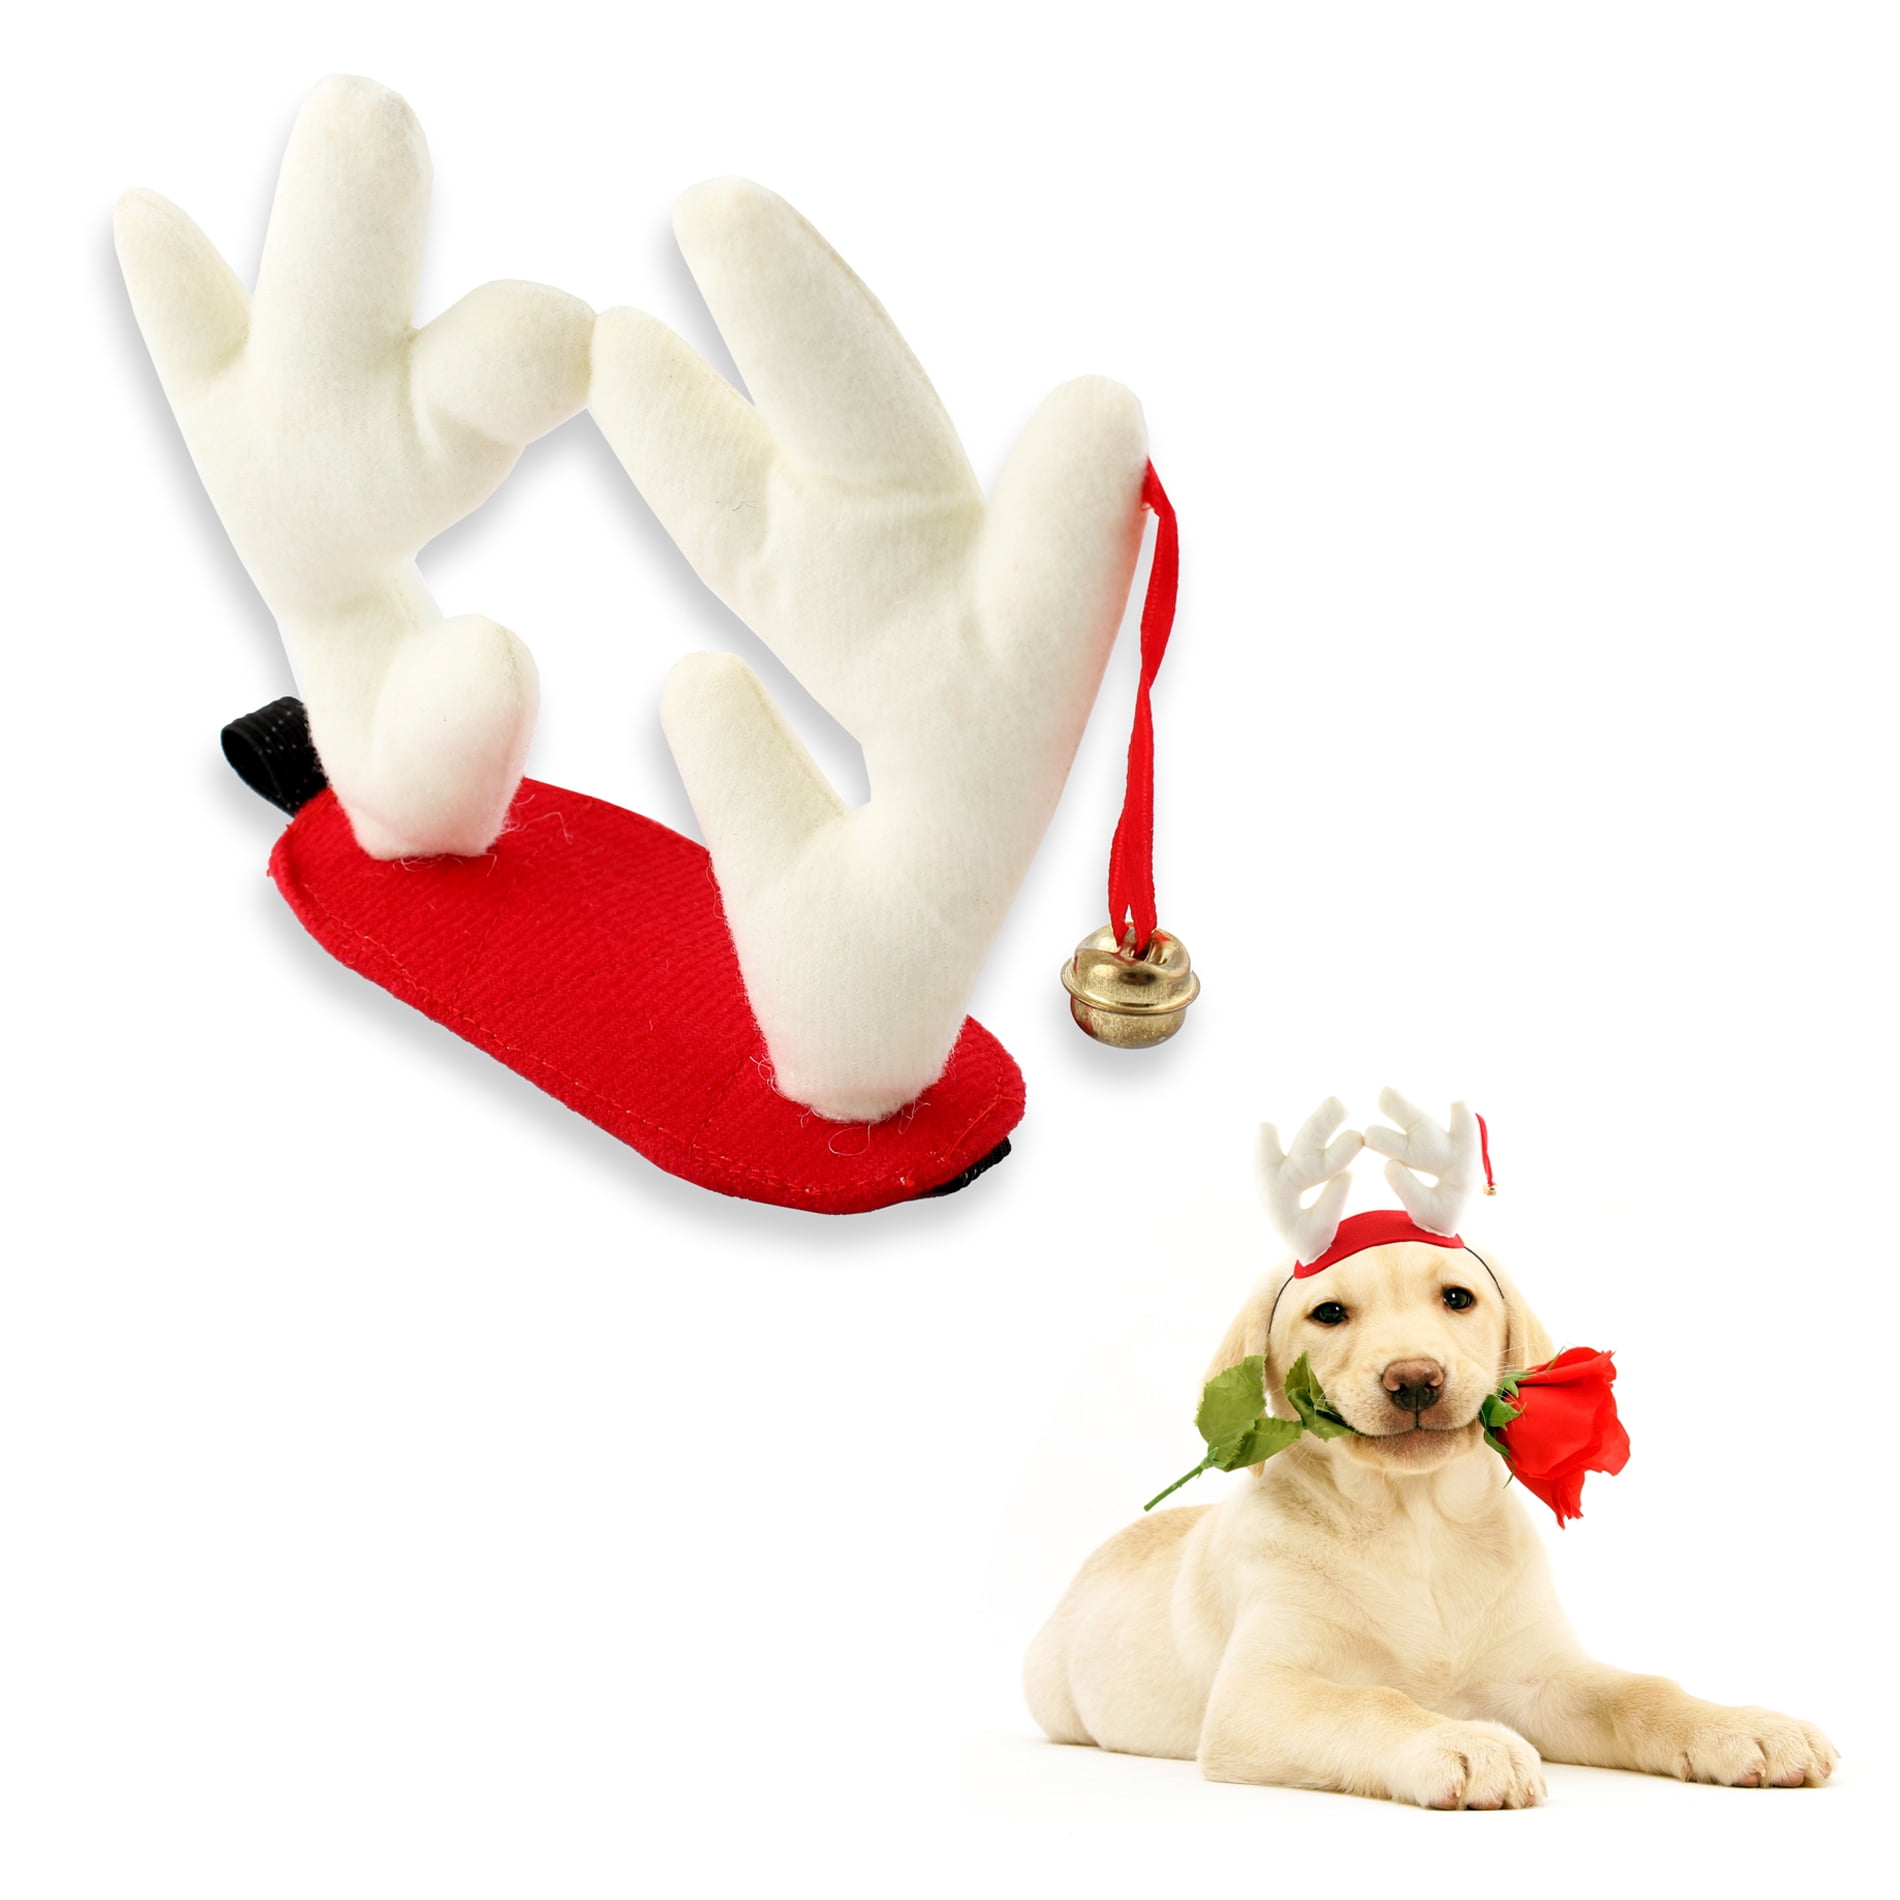 Pet Christmas Fancy Dress Elk Reindeer Antlers Hat Headband for Dog Cat Clothes Costumes, Red M ...